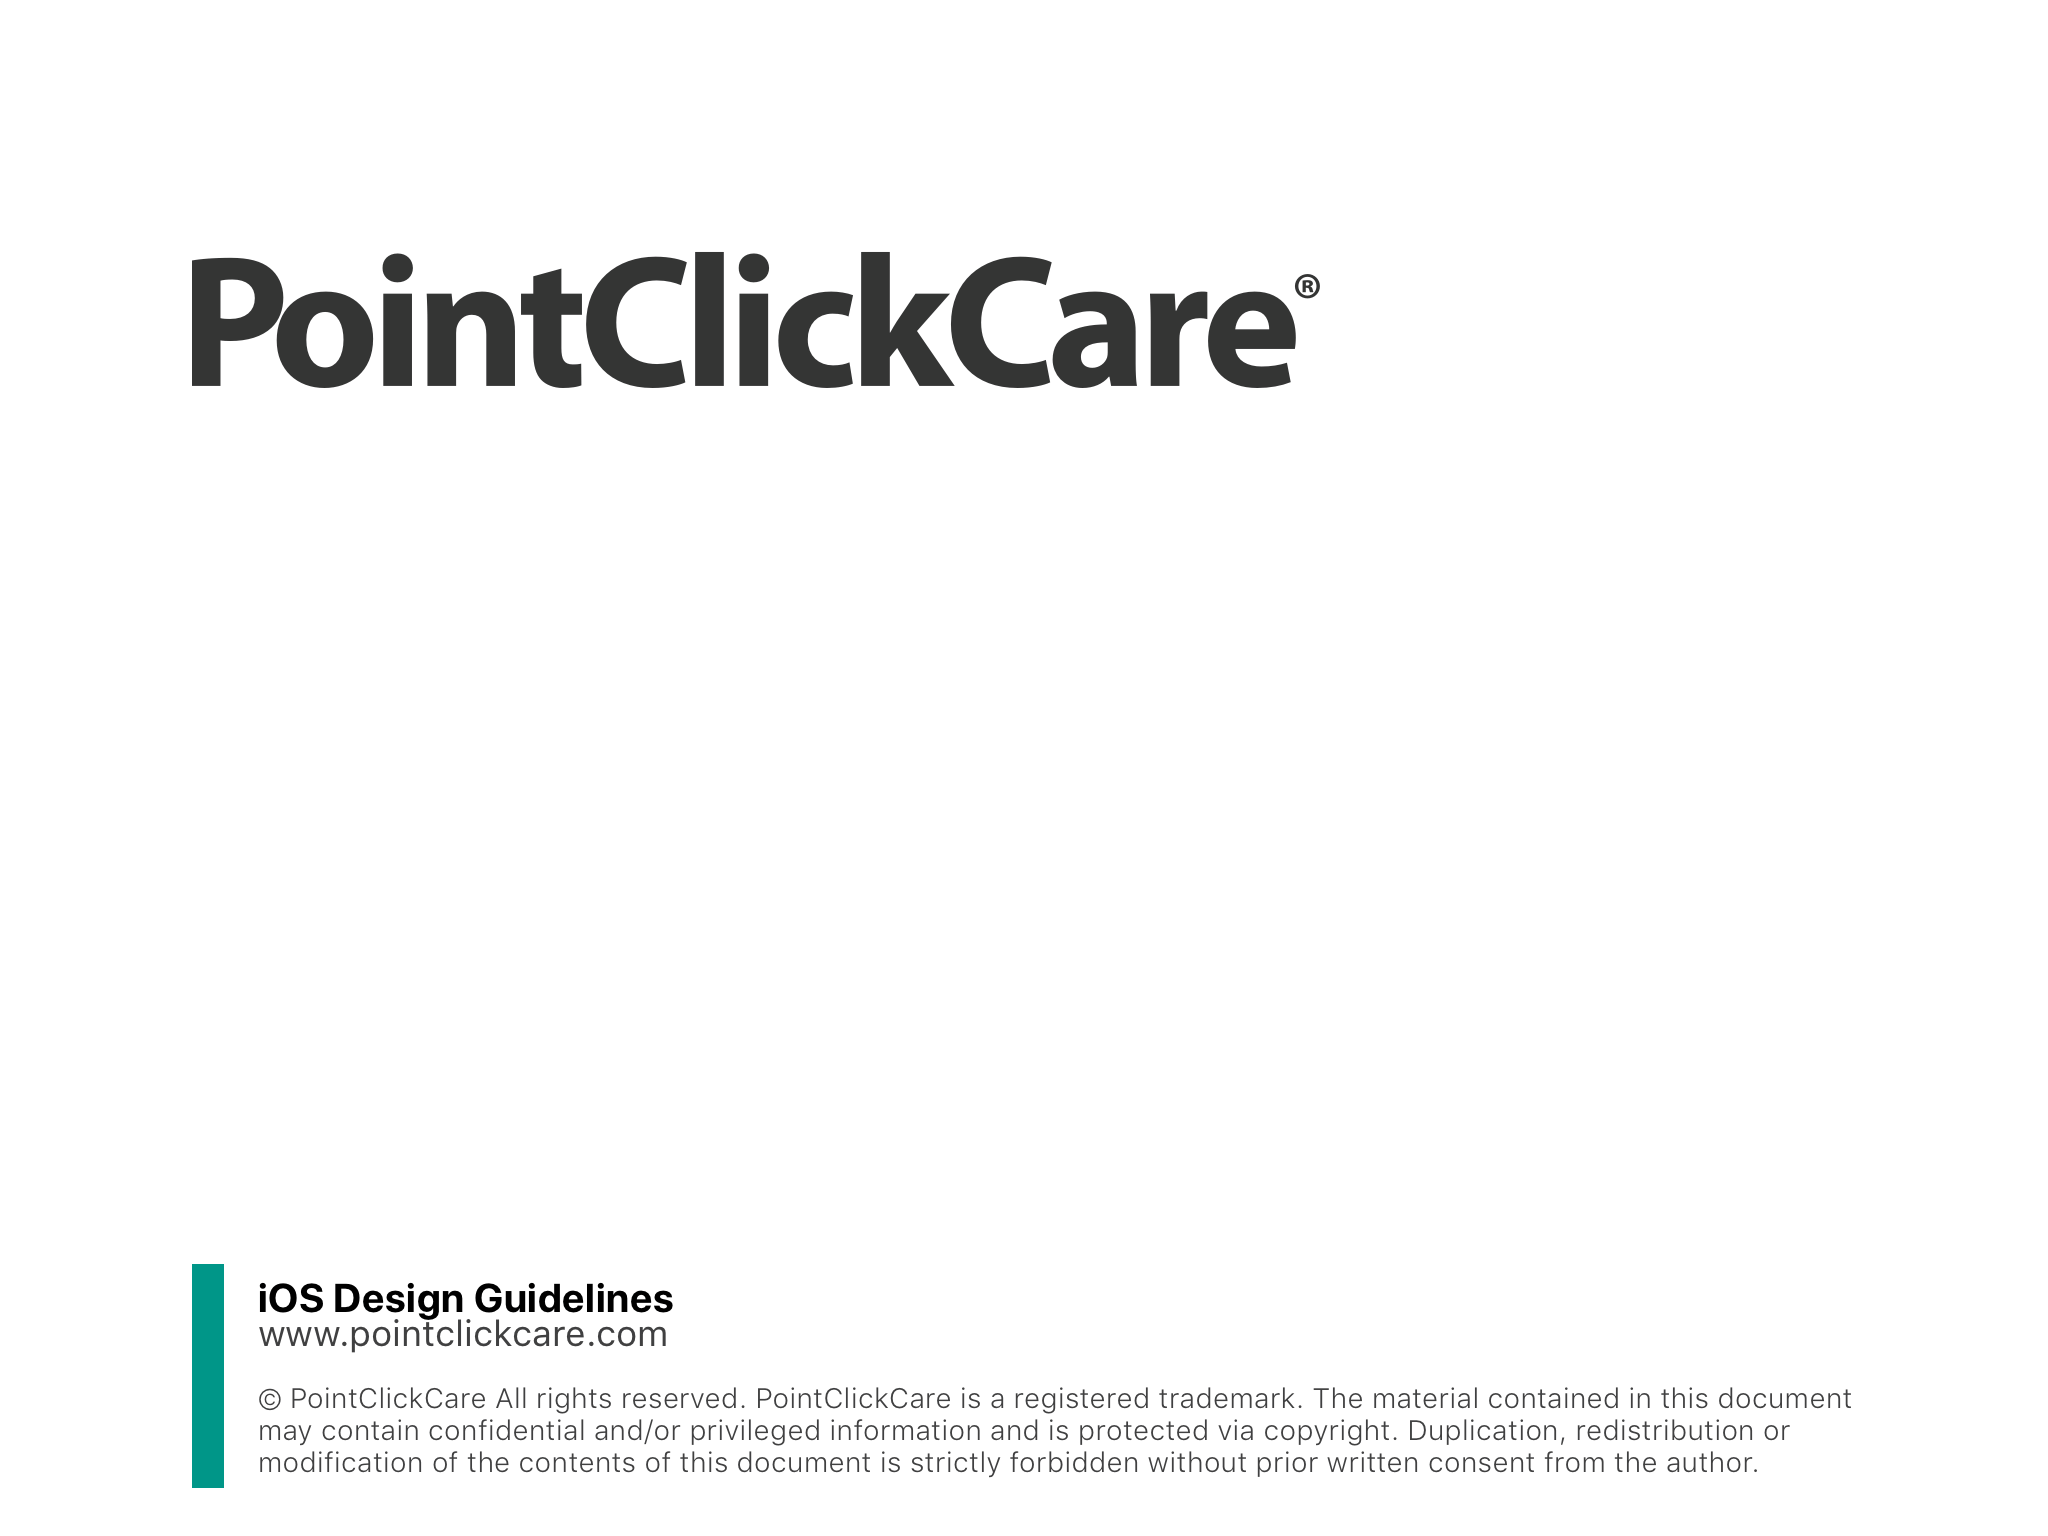 PointClickCare Style Guide